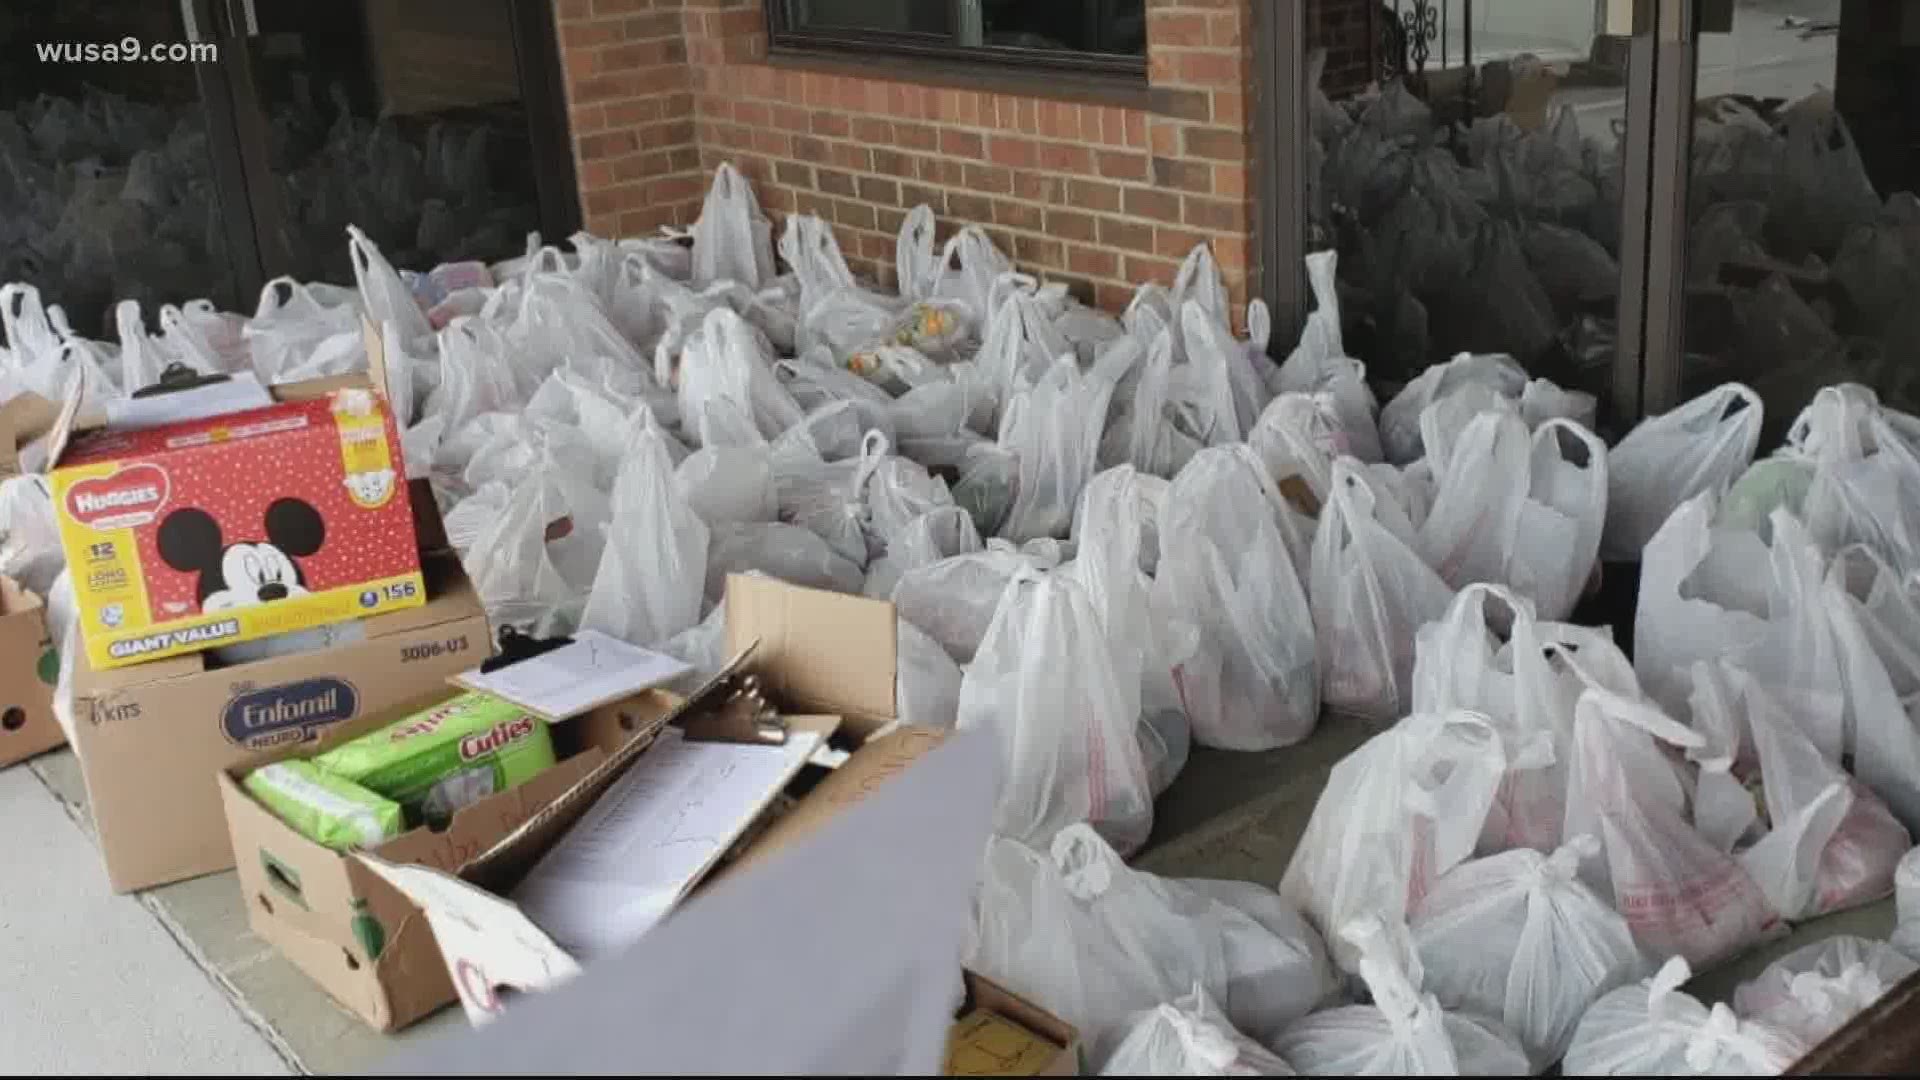 Grocery deliveries have been made to more than 2,000 immigrant families thanks to Casa de Maryland, who also helps with contact tracing after a virus diagnosis.